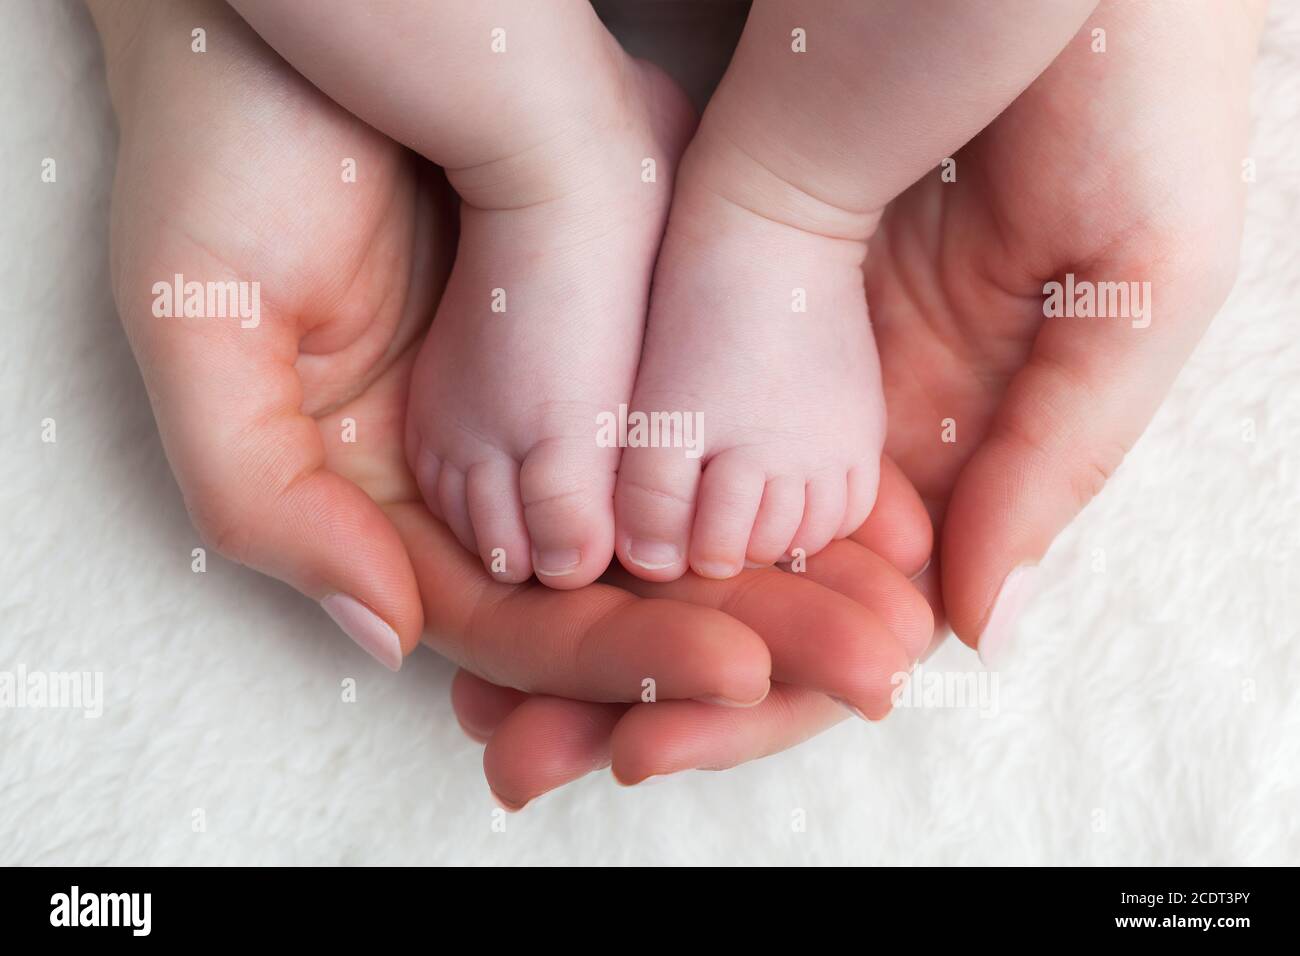 Newborn baby feet in mother#39;s hands. Child care, feeling safe, protect. Stock Photo